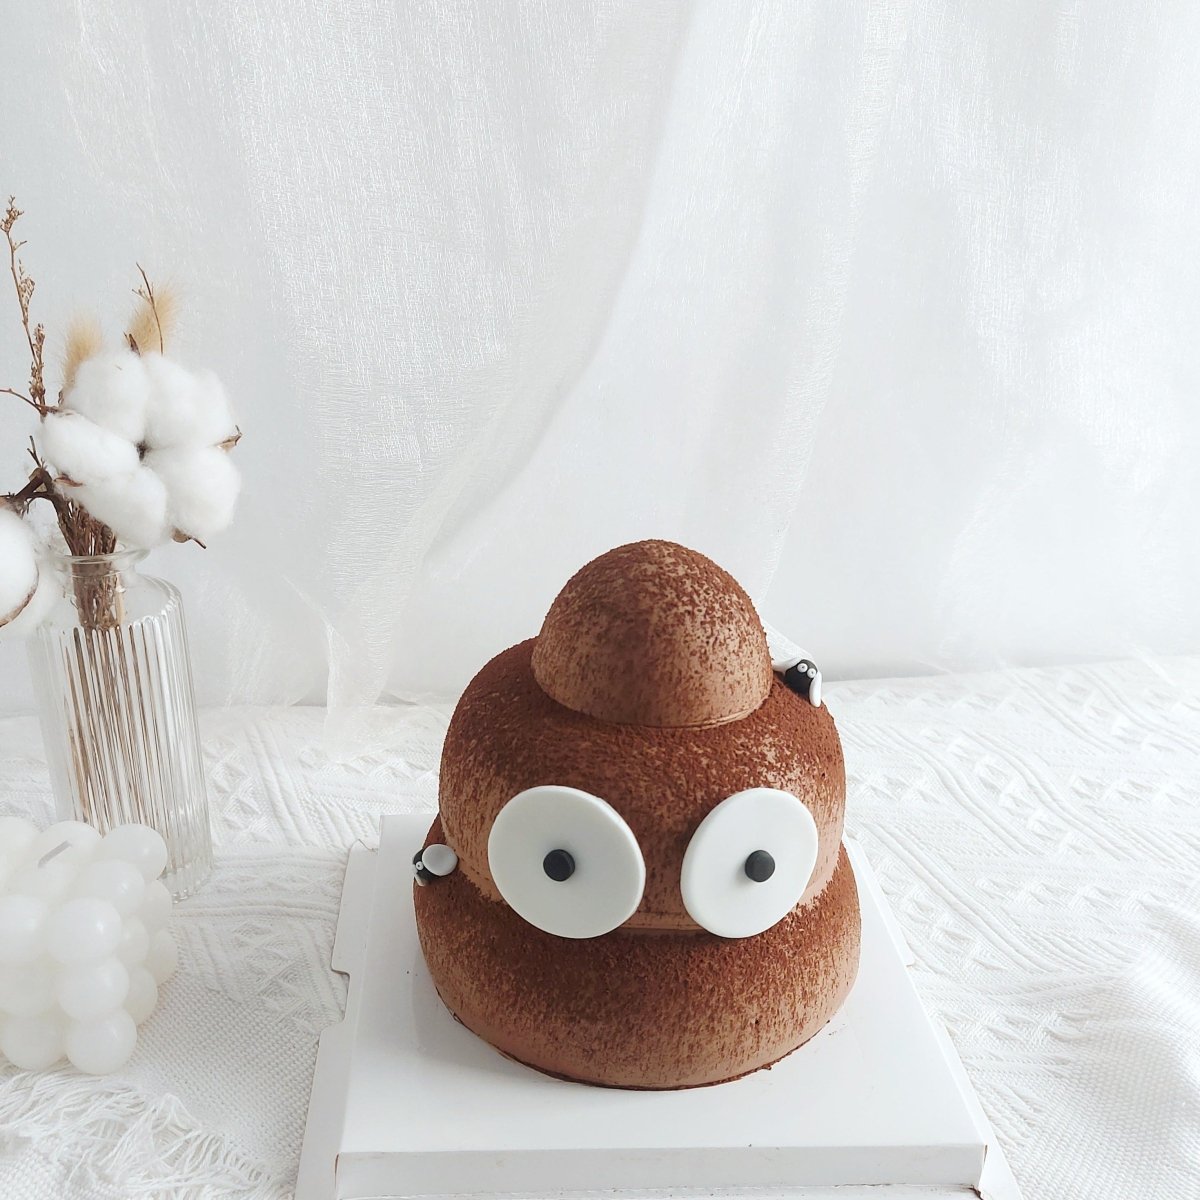 338 Poop Cake Images, Stock Photos, 3D objects, & Vectors | Shutterstock